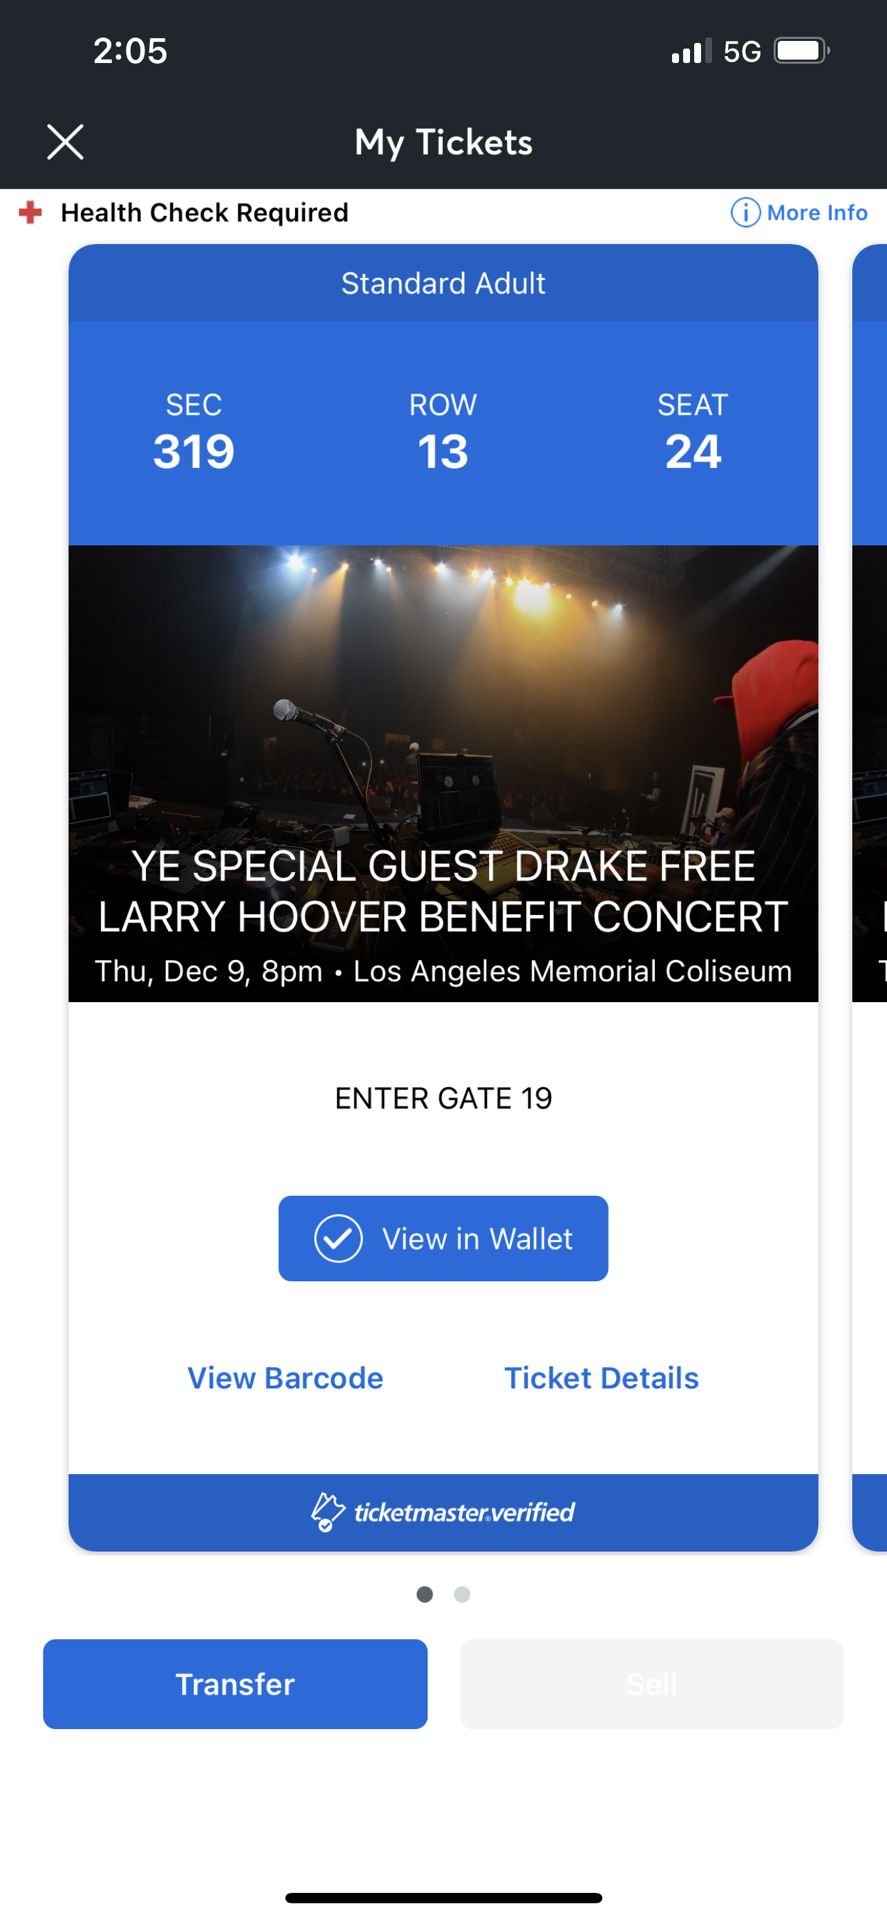 Ye Special Guest Drake Free Larry Hoover Benefit Concert 